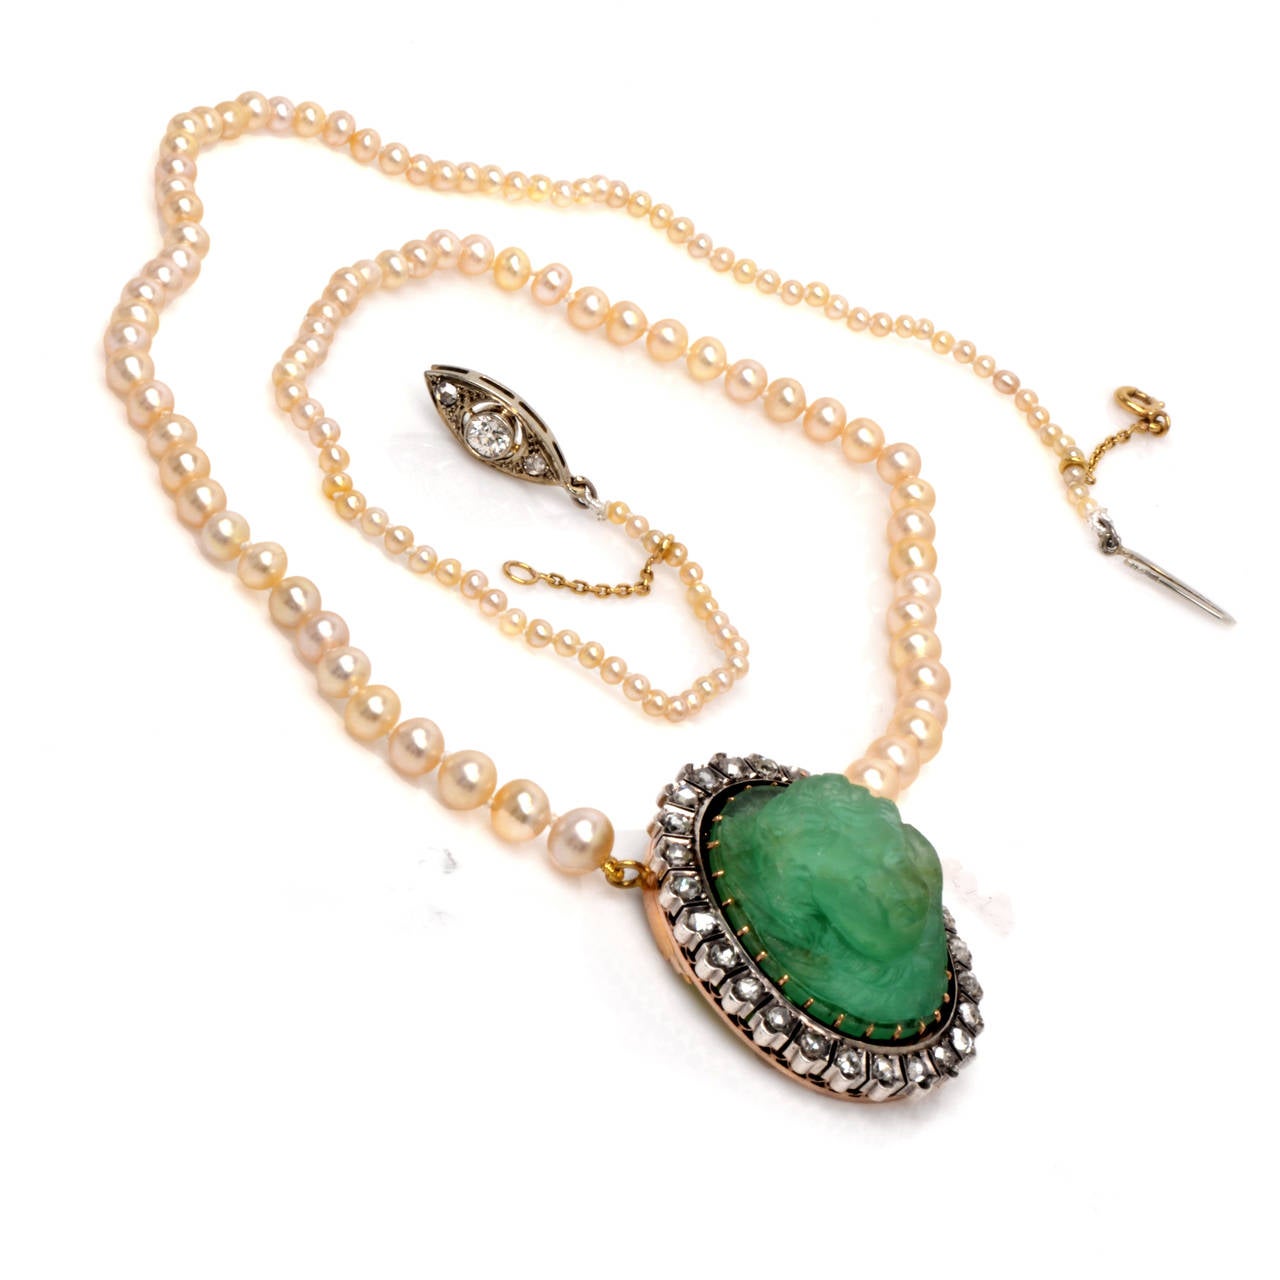 This authentic antique necklace with natural salt water pearls, an immaculately carved angel emerald cameo and antique rose-cut diamonds is of French provenance, bearing the official French hallmark and is crafted in a combination of  18K rose gold